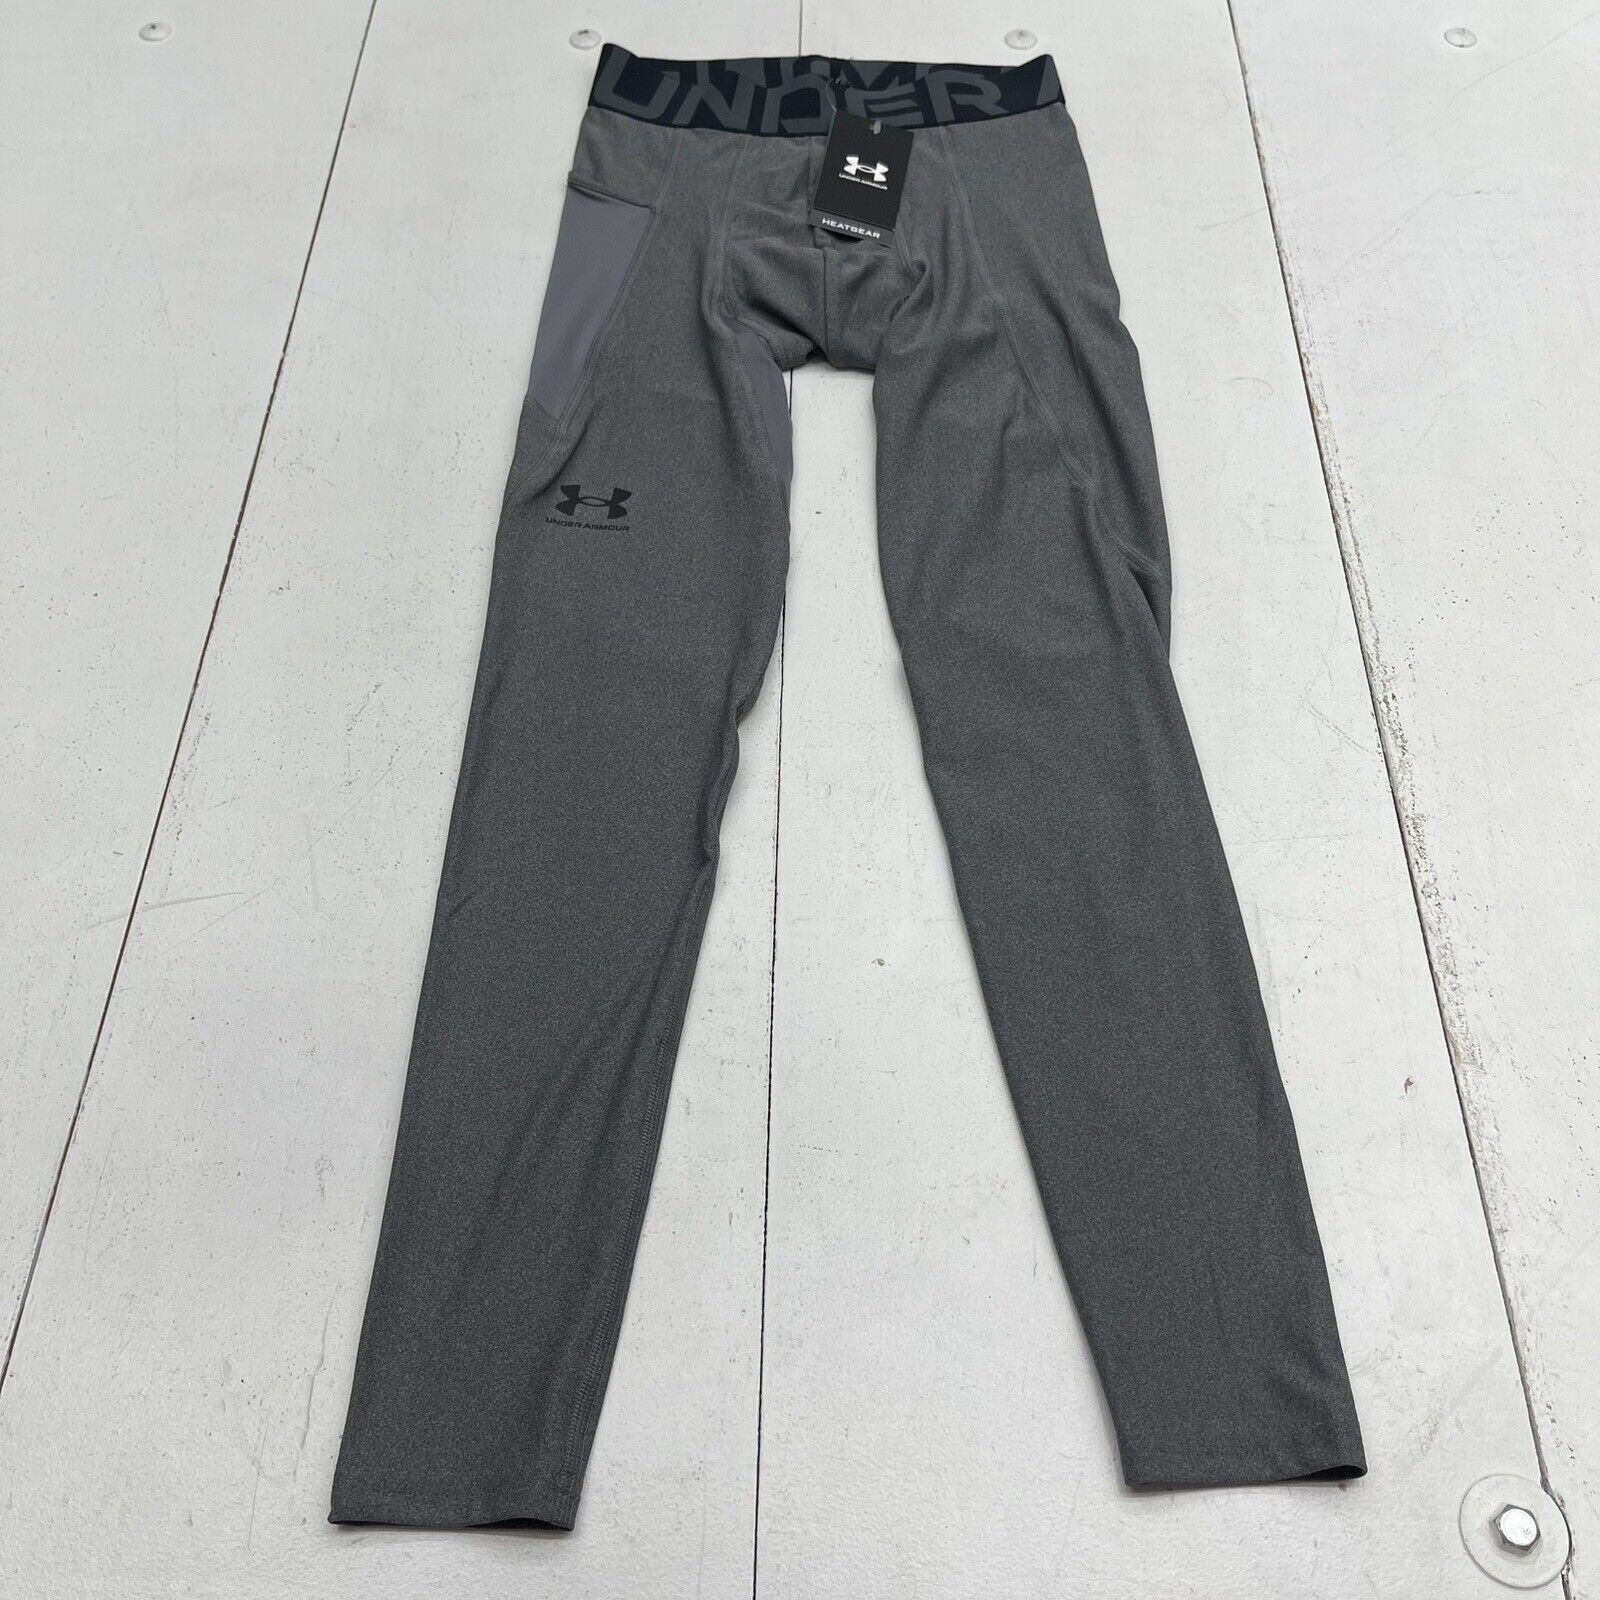 Under Armour Hear Gear Armour Leggings Grey Mens Size Small New - beyond  exchange